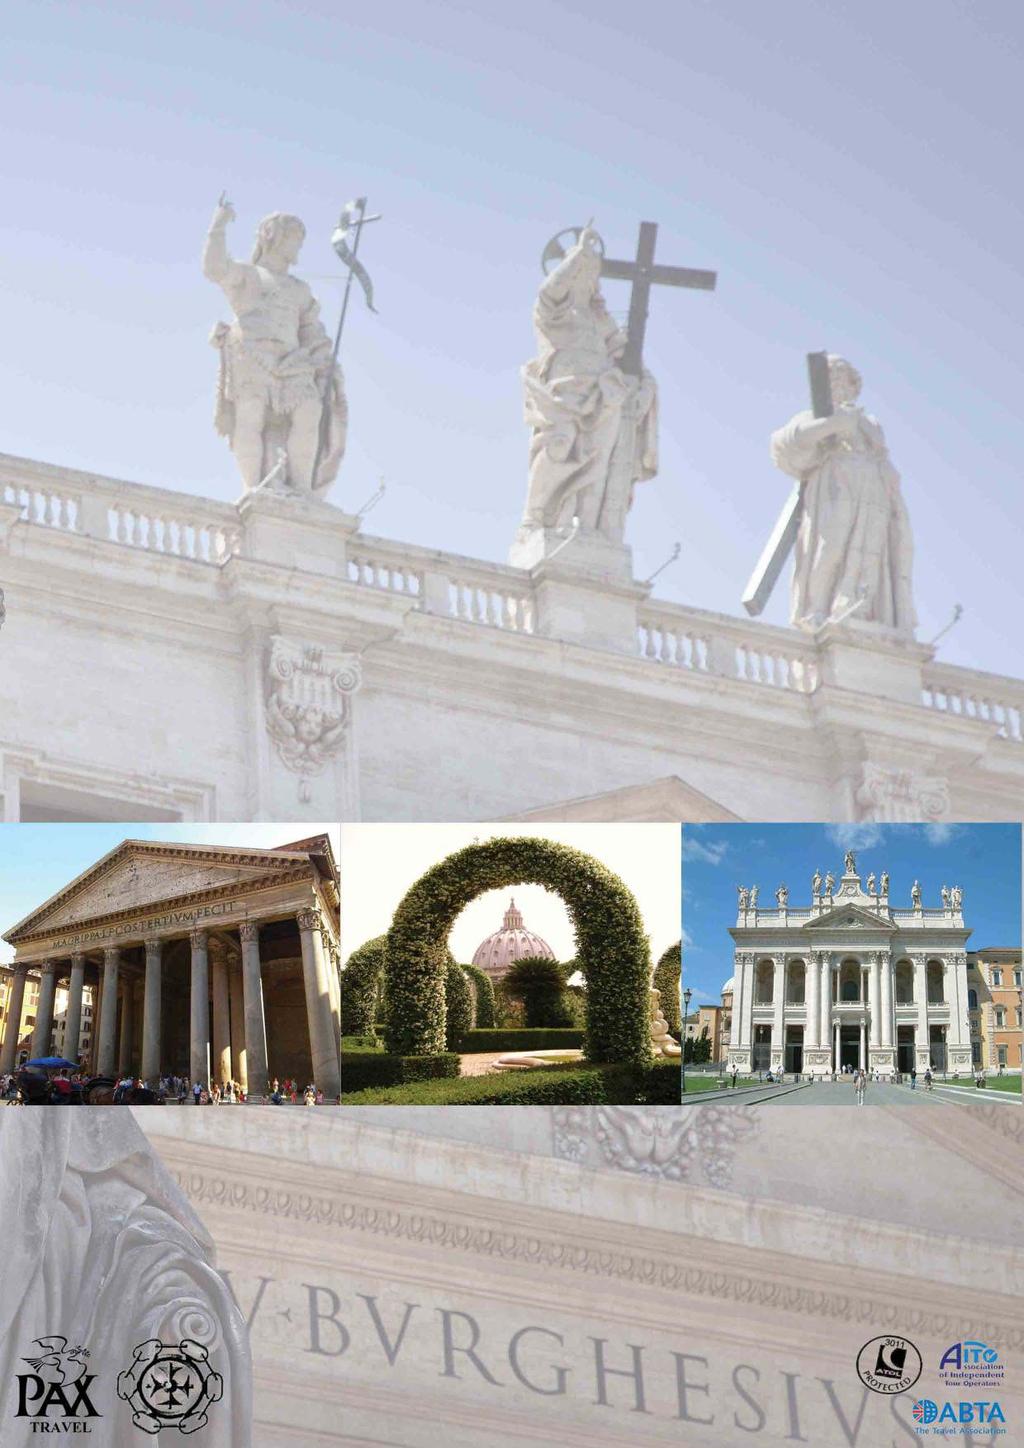 PRiCe = 1069 without flights includes: 6-nights accommodation in shared twin or double-bedded rooms with en suite facilities at The NH Giustiniano Hotel. Rome Hotel Tax.